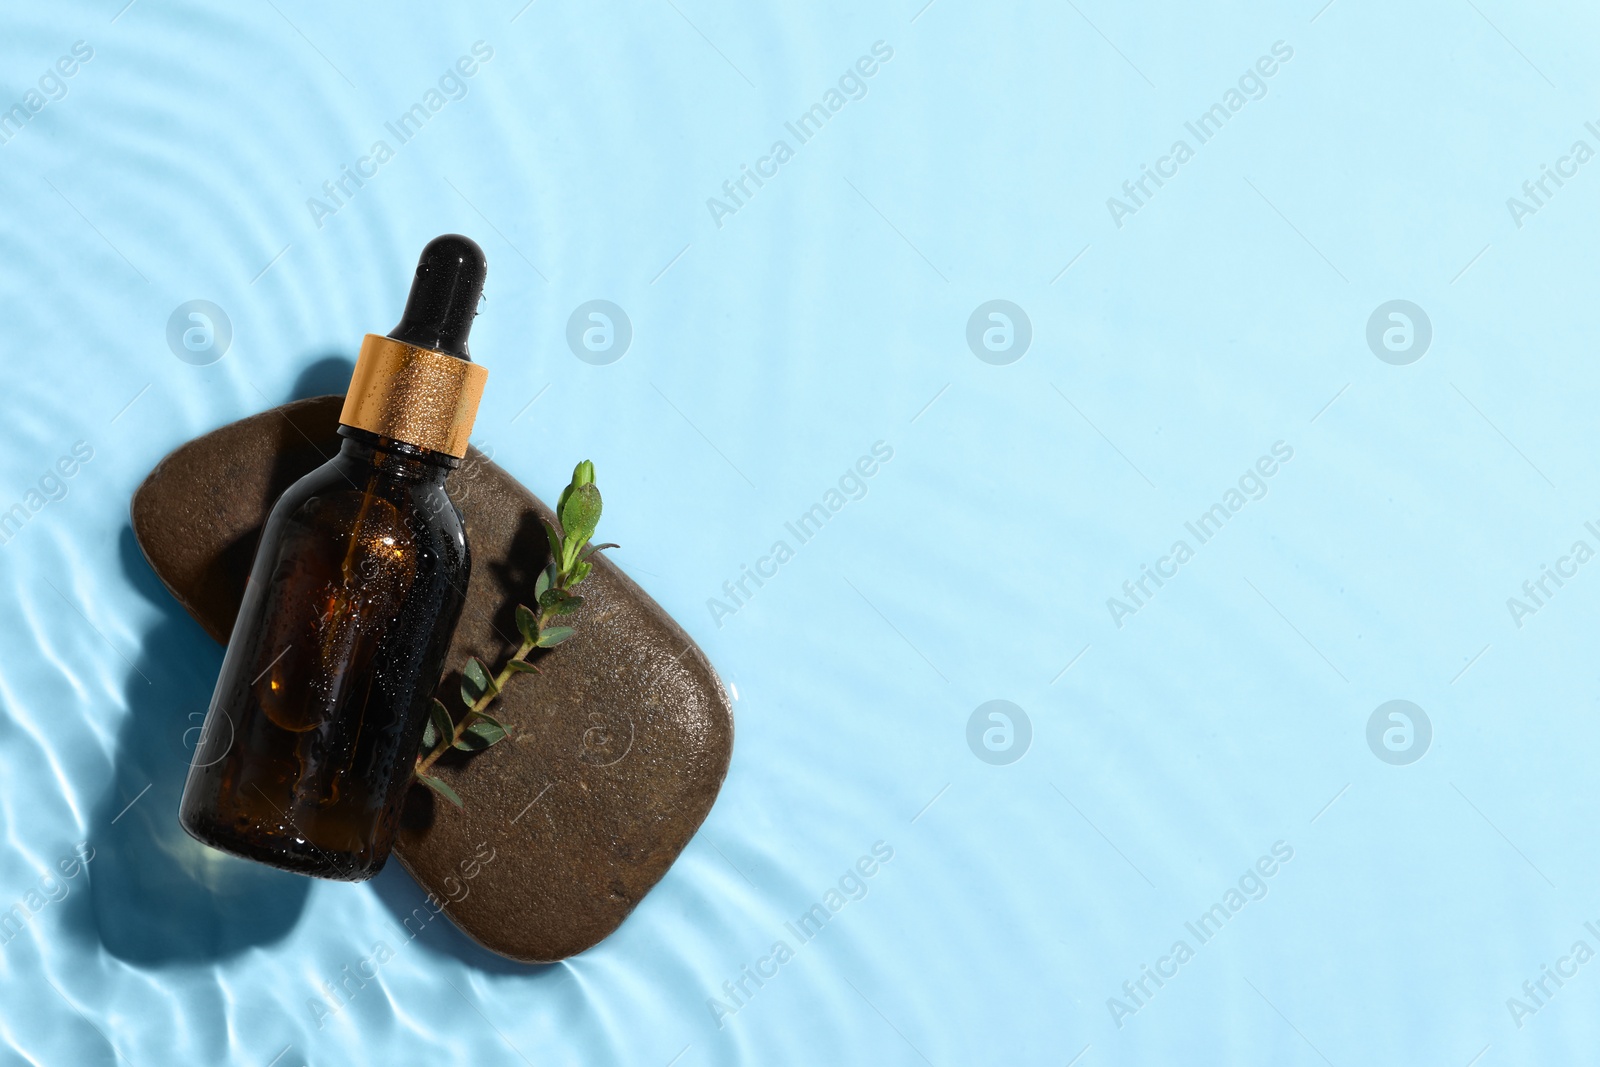 Photo of Bottle of cosmetic oil, leaves and stone in water on light blue background, top view. Space for text